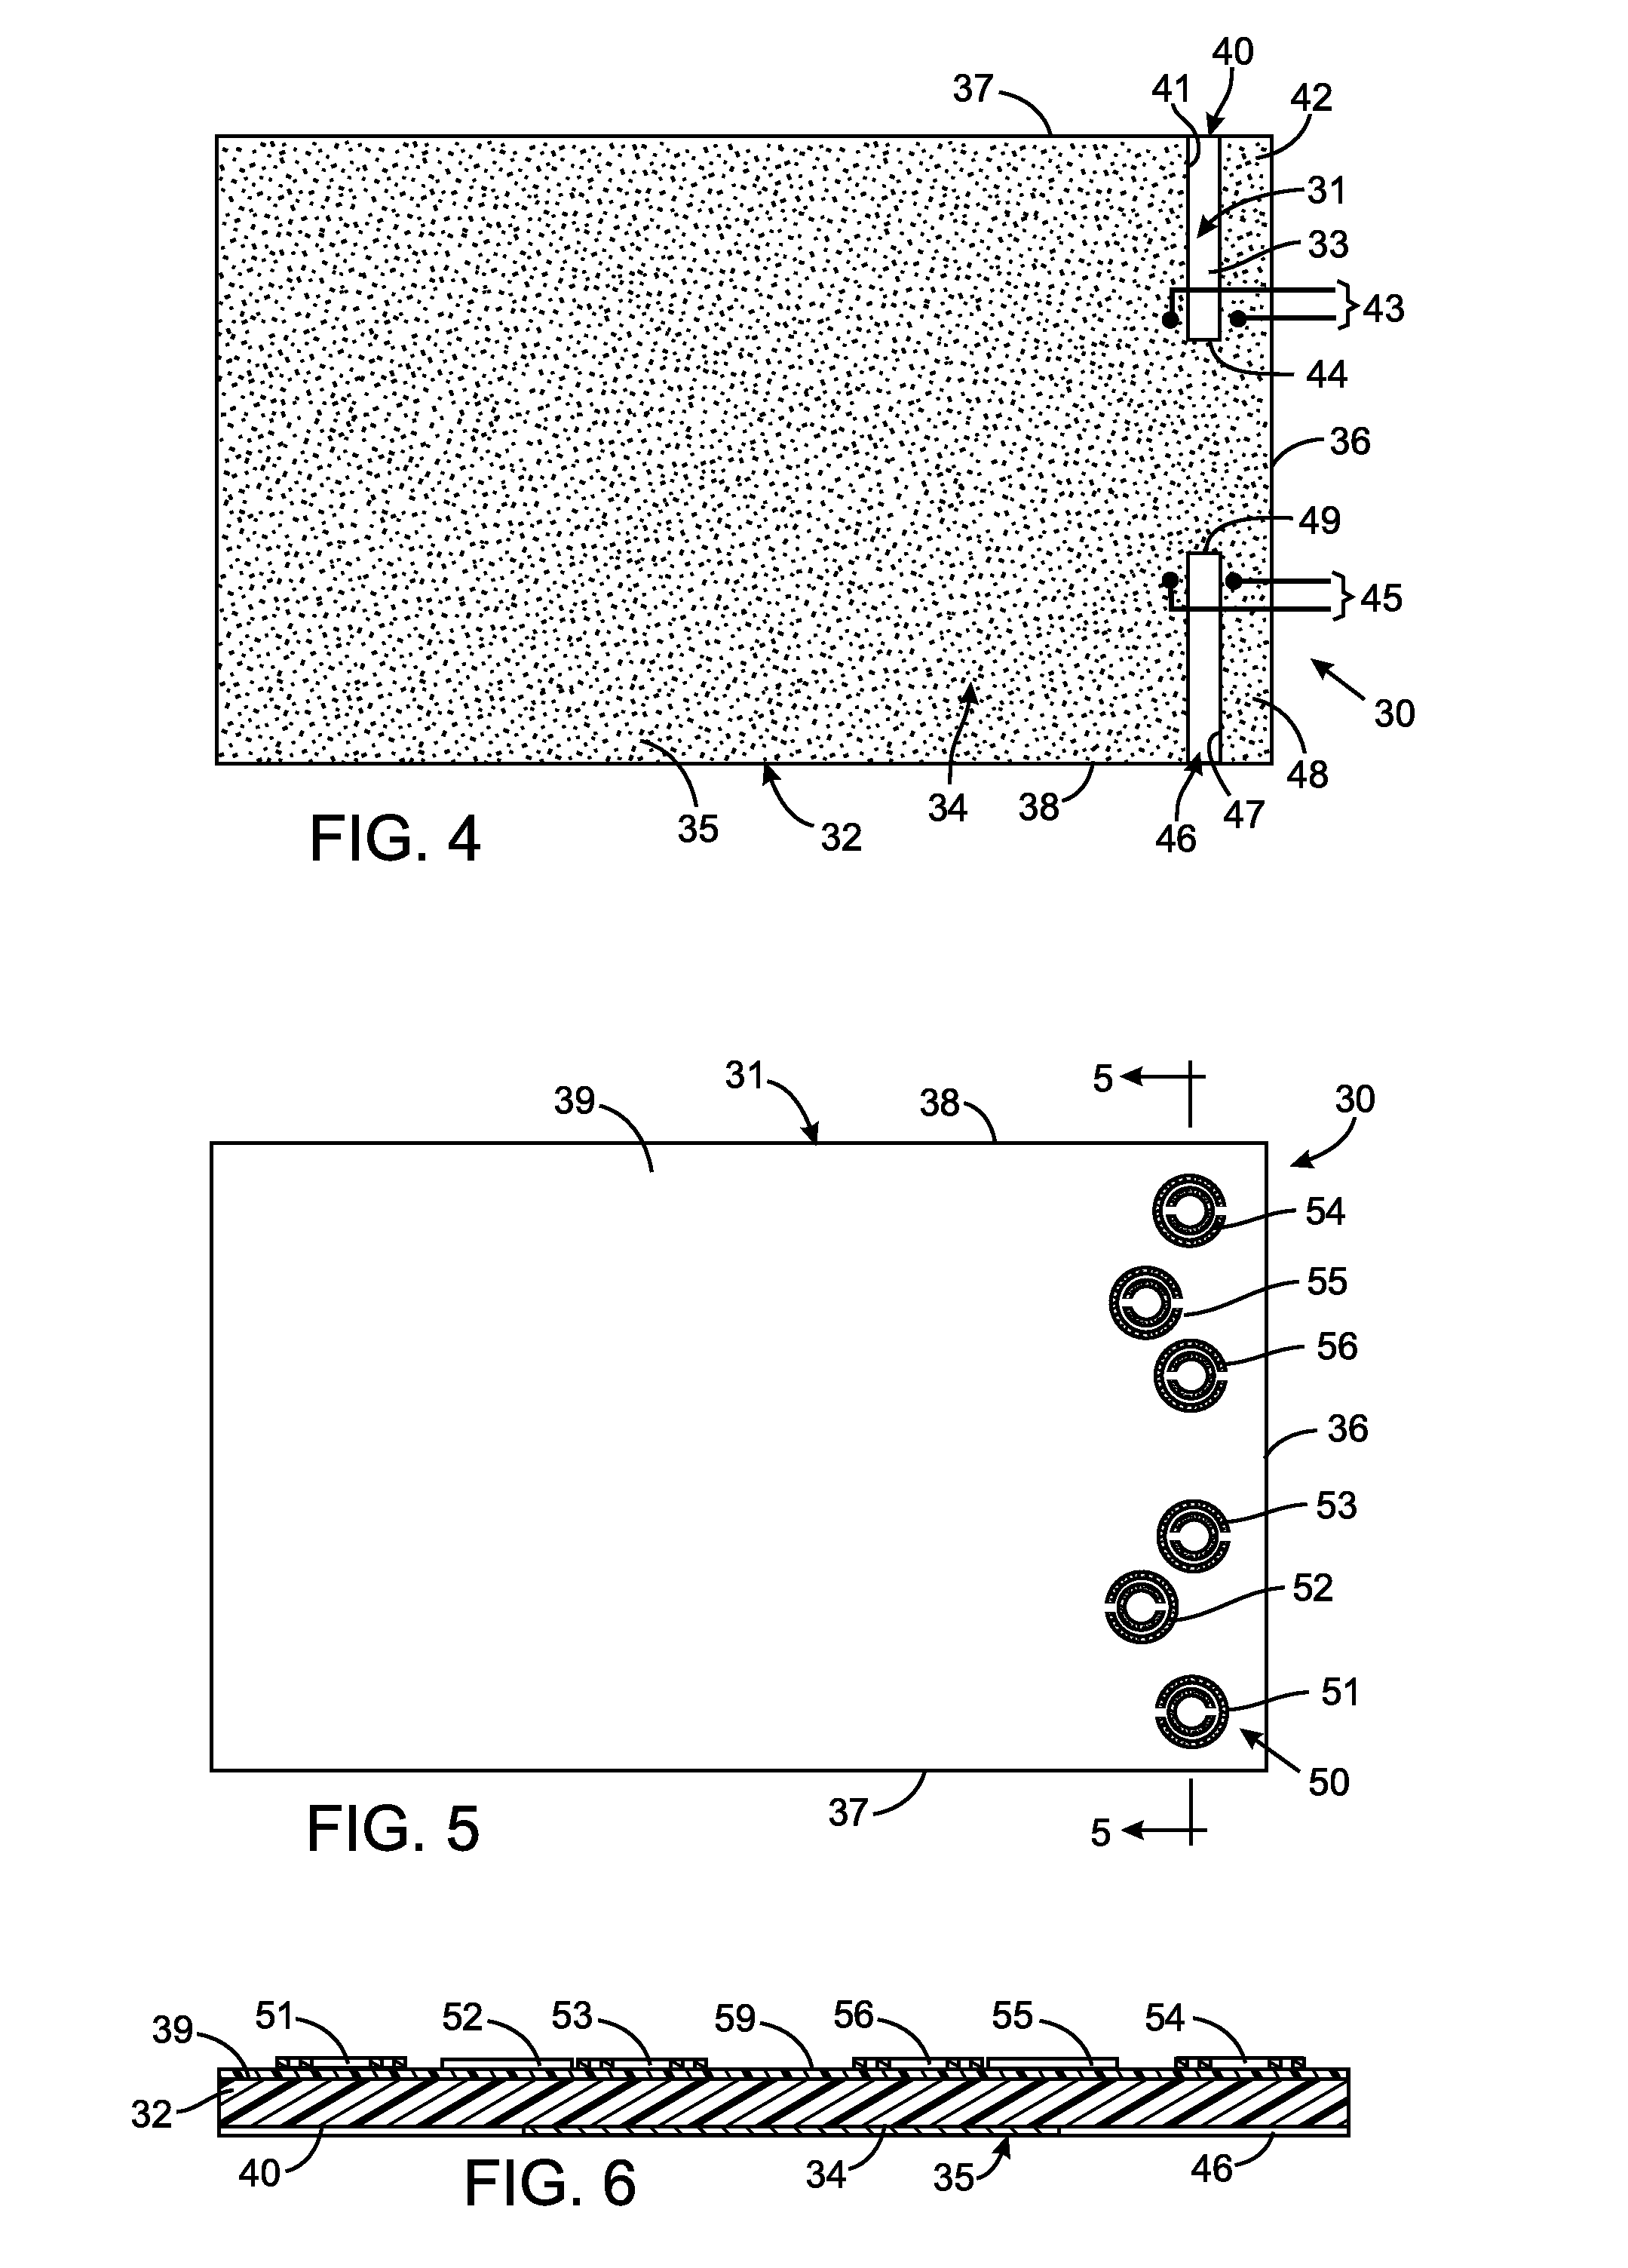 Antenna assembly utilizing metal-dielectric resonant structures for specific absorption rate compliance